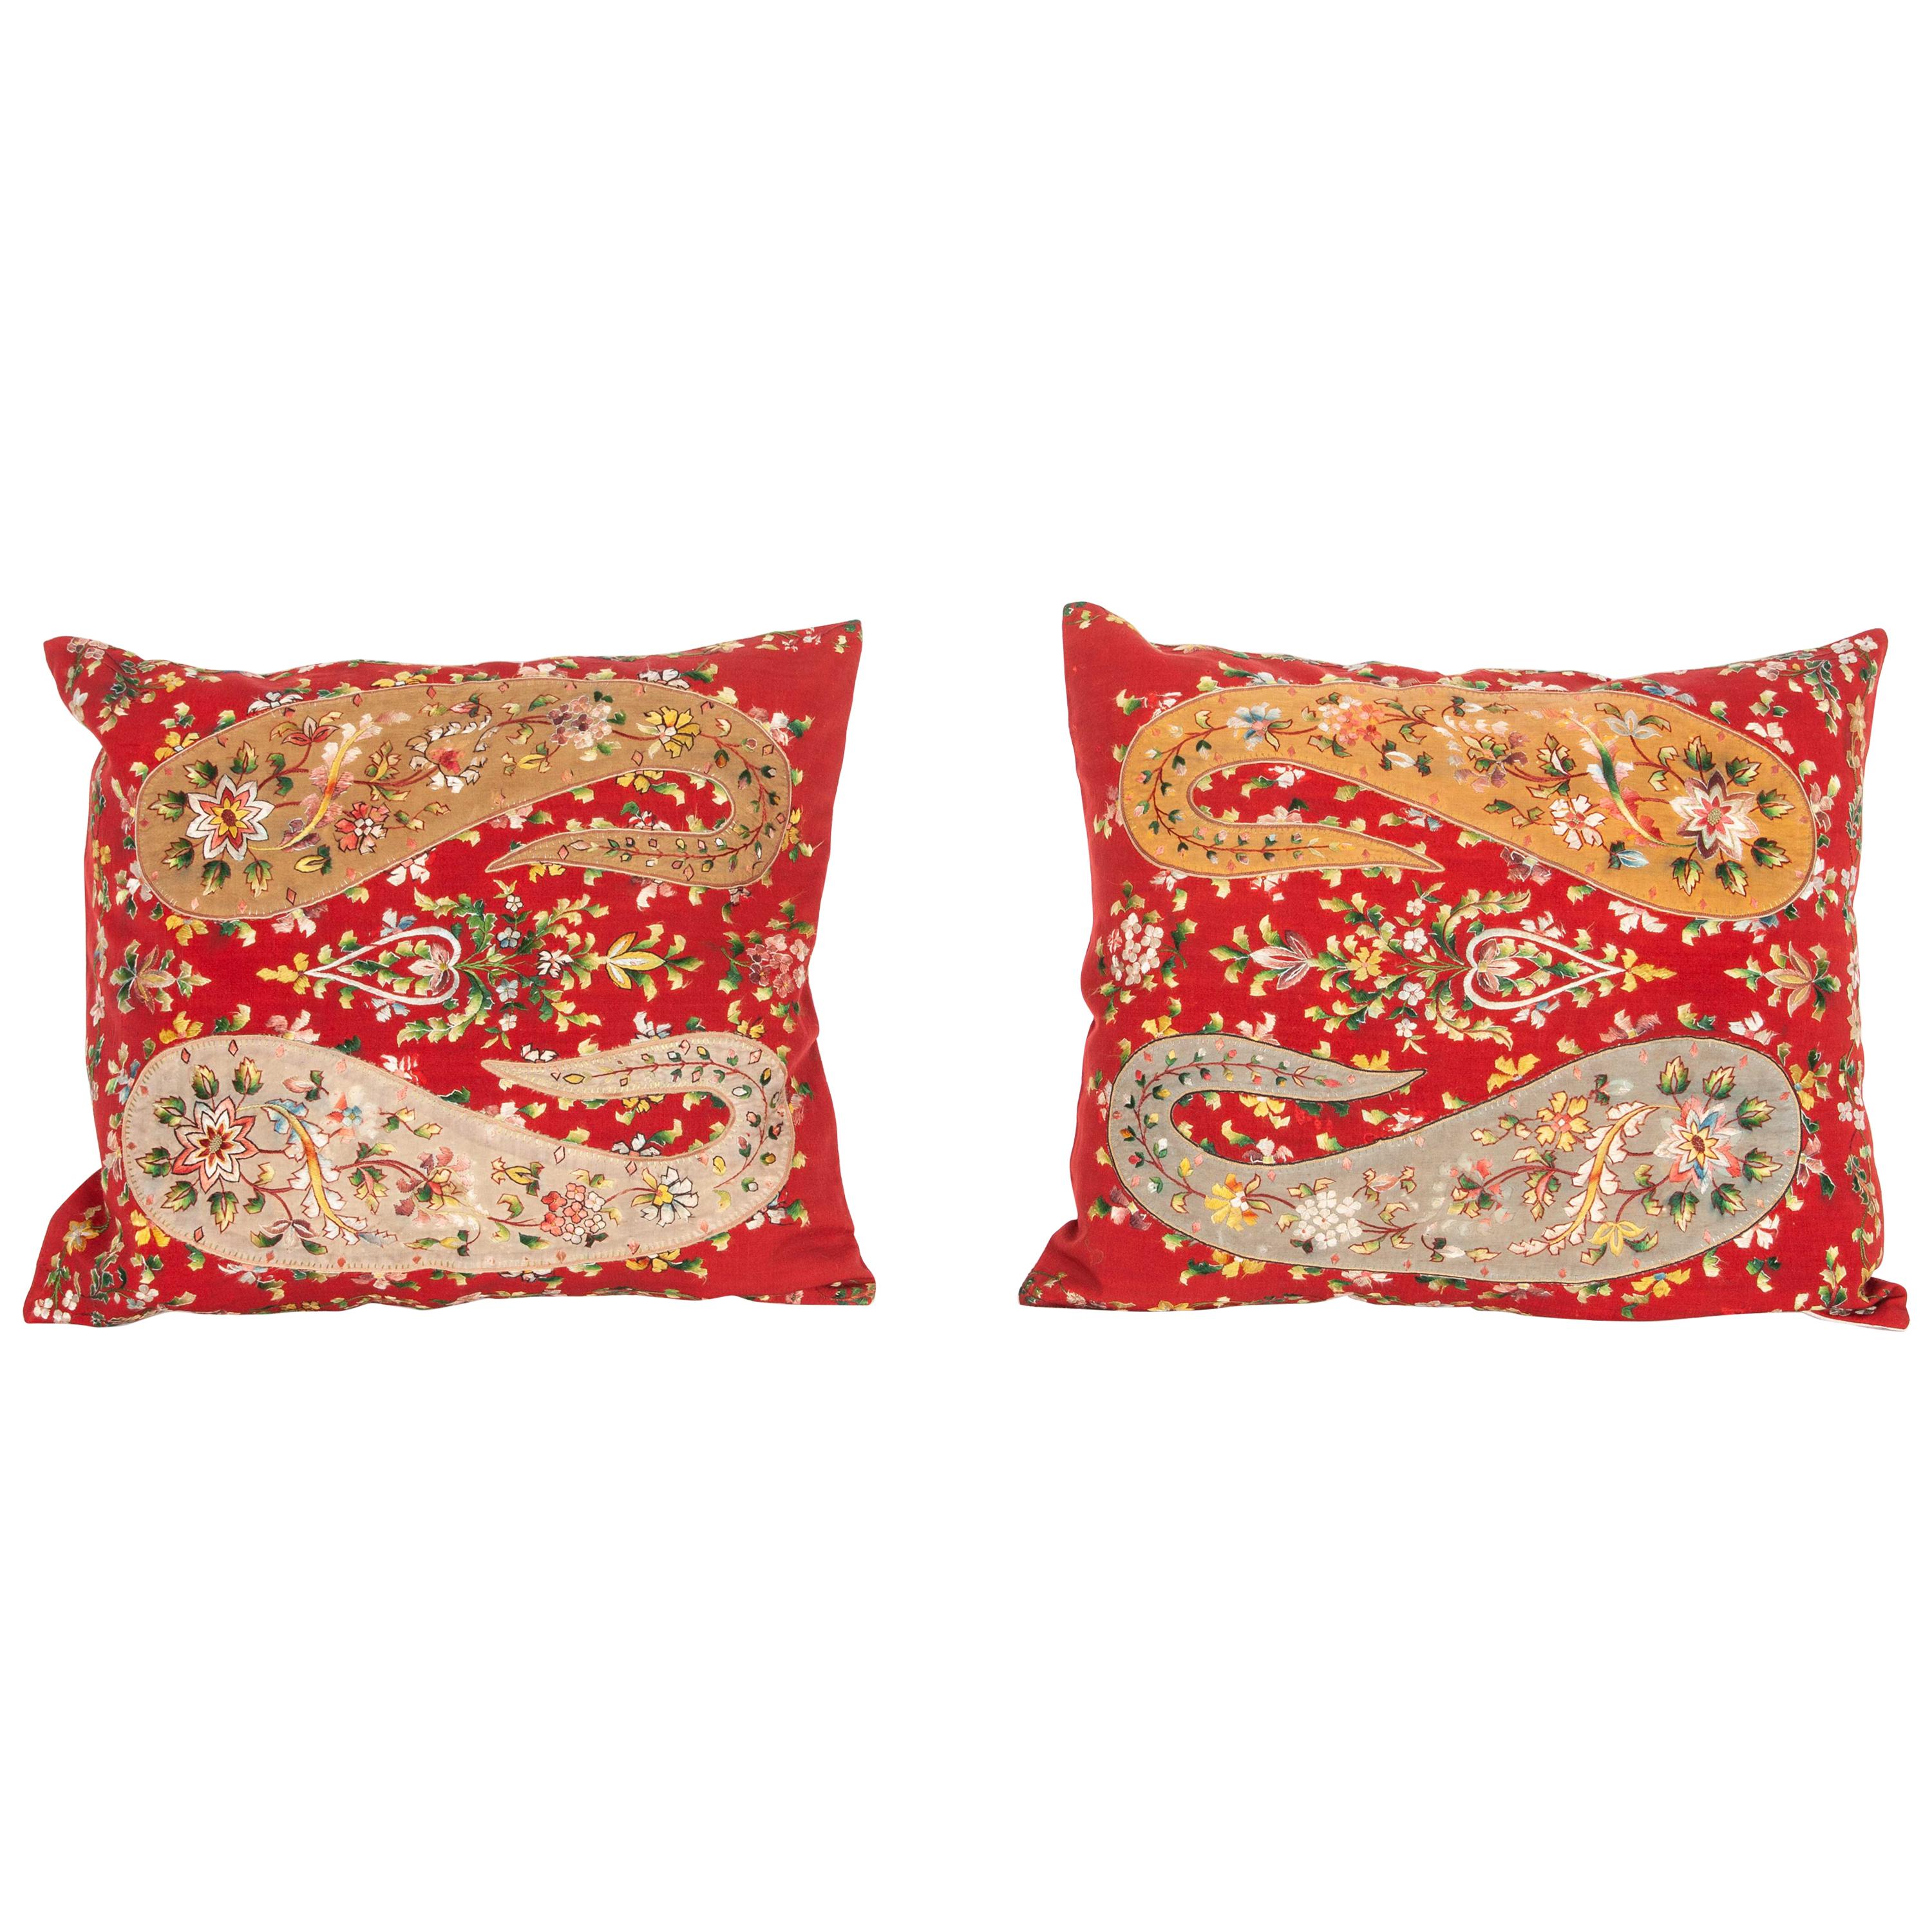 Pillow Cases Fashioned from an Early 20th Century Indian Shawl For Sale